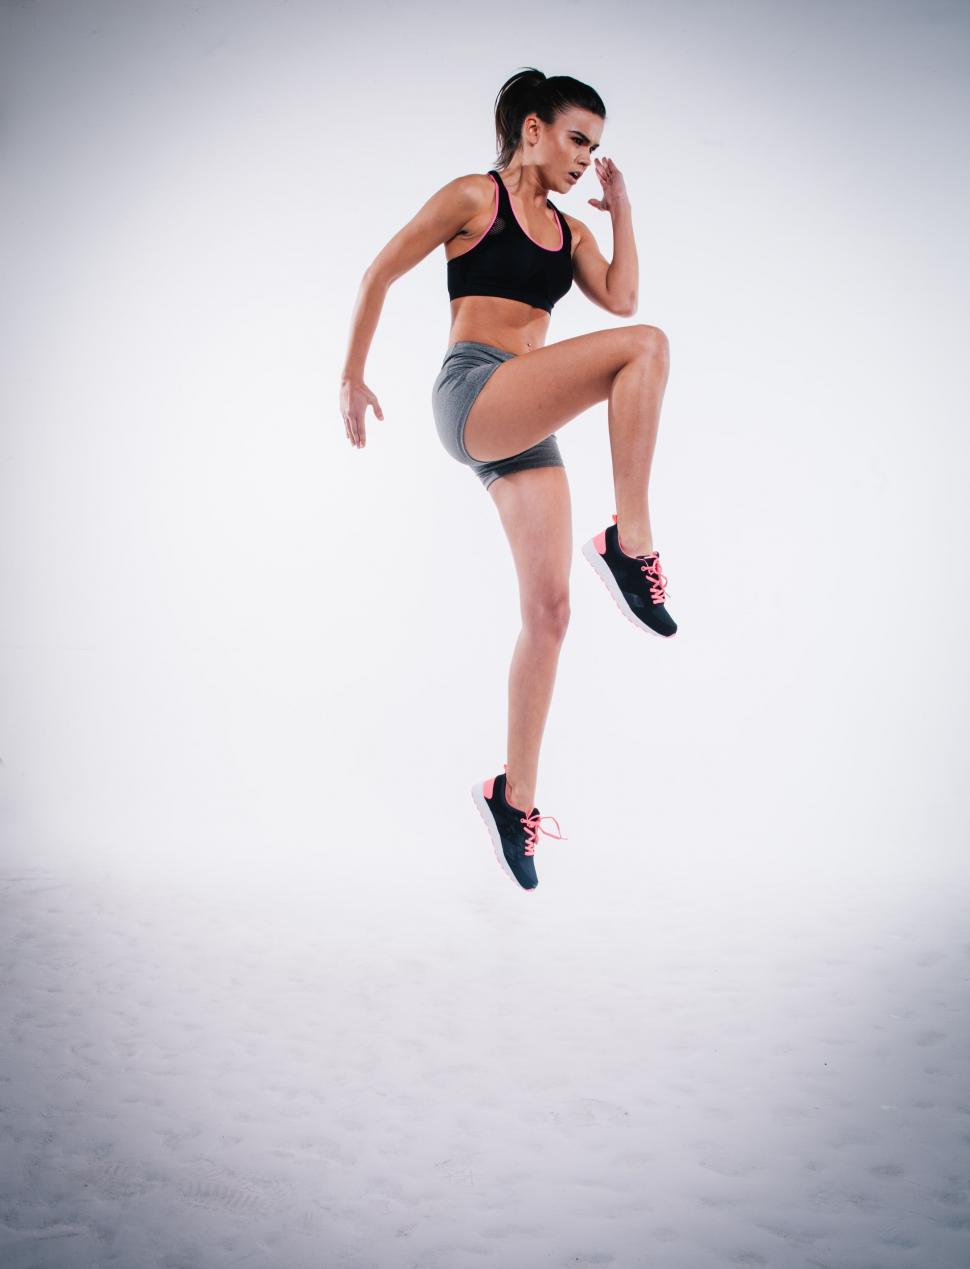 Free Image of Woman doing exercise  